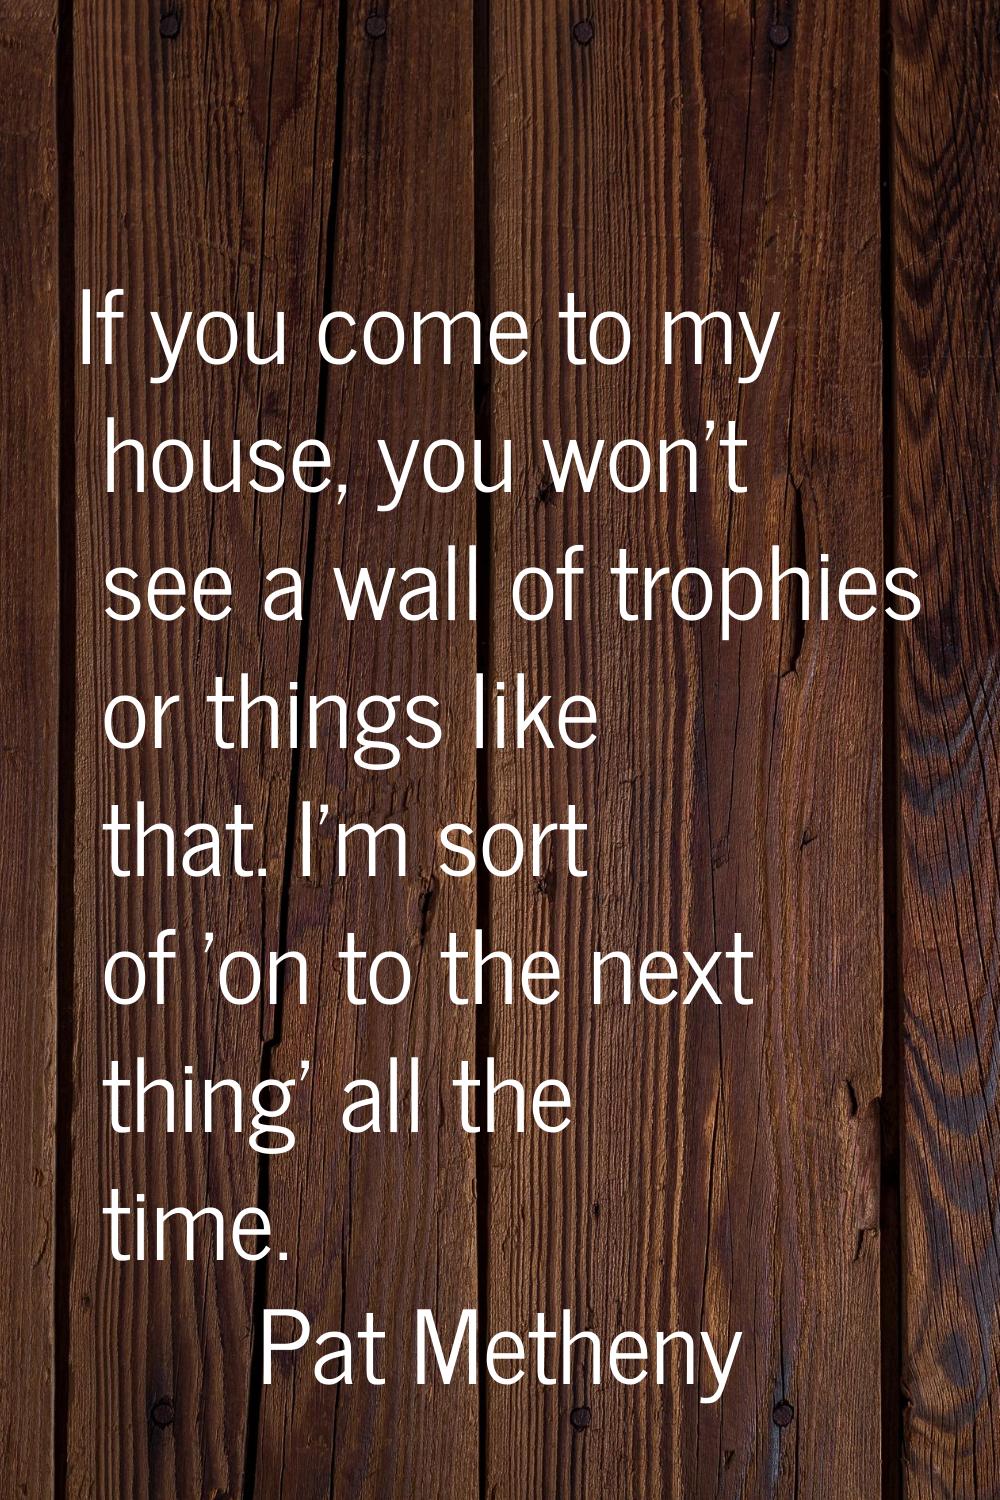 If you come to my house, you won't see a wall of trophies or things like that. I'm sort of 'on to t